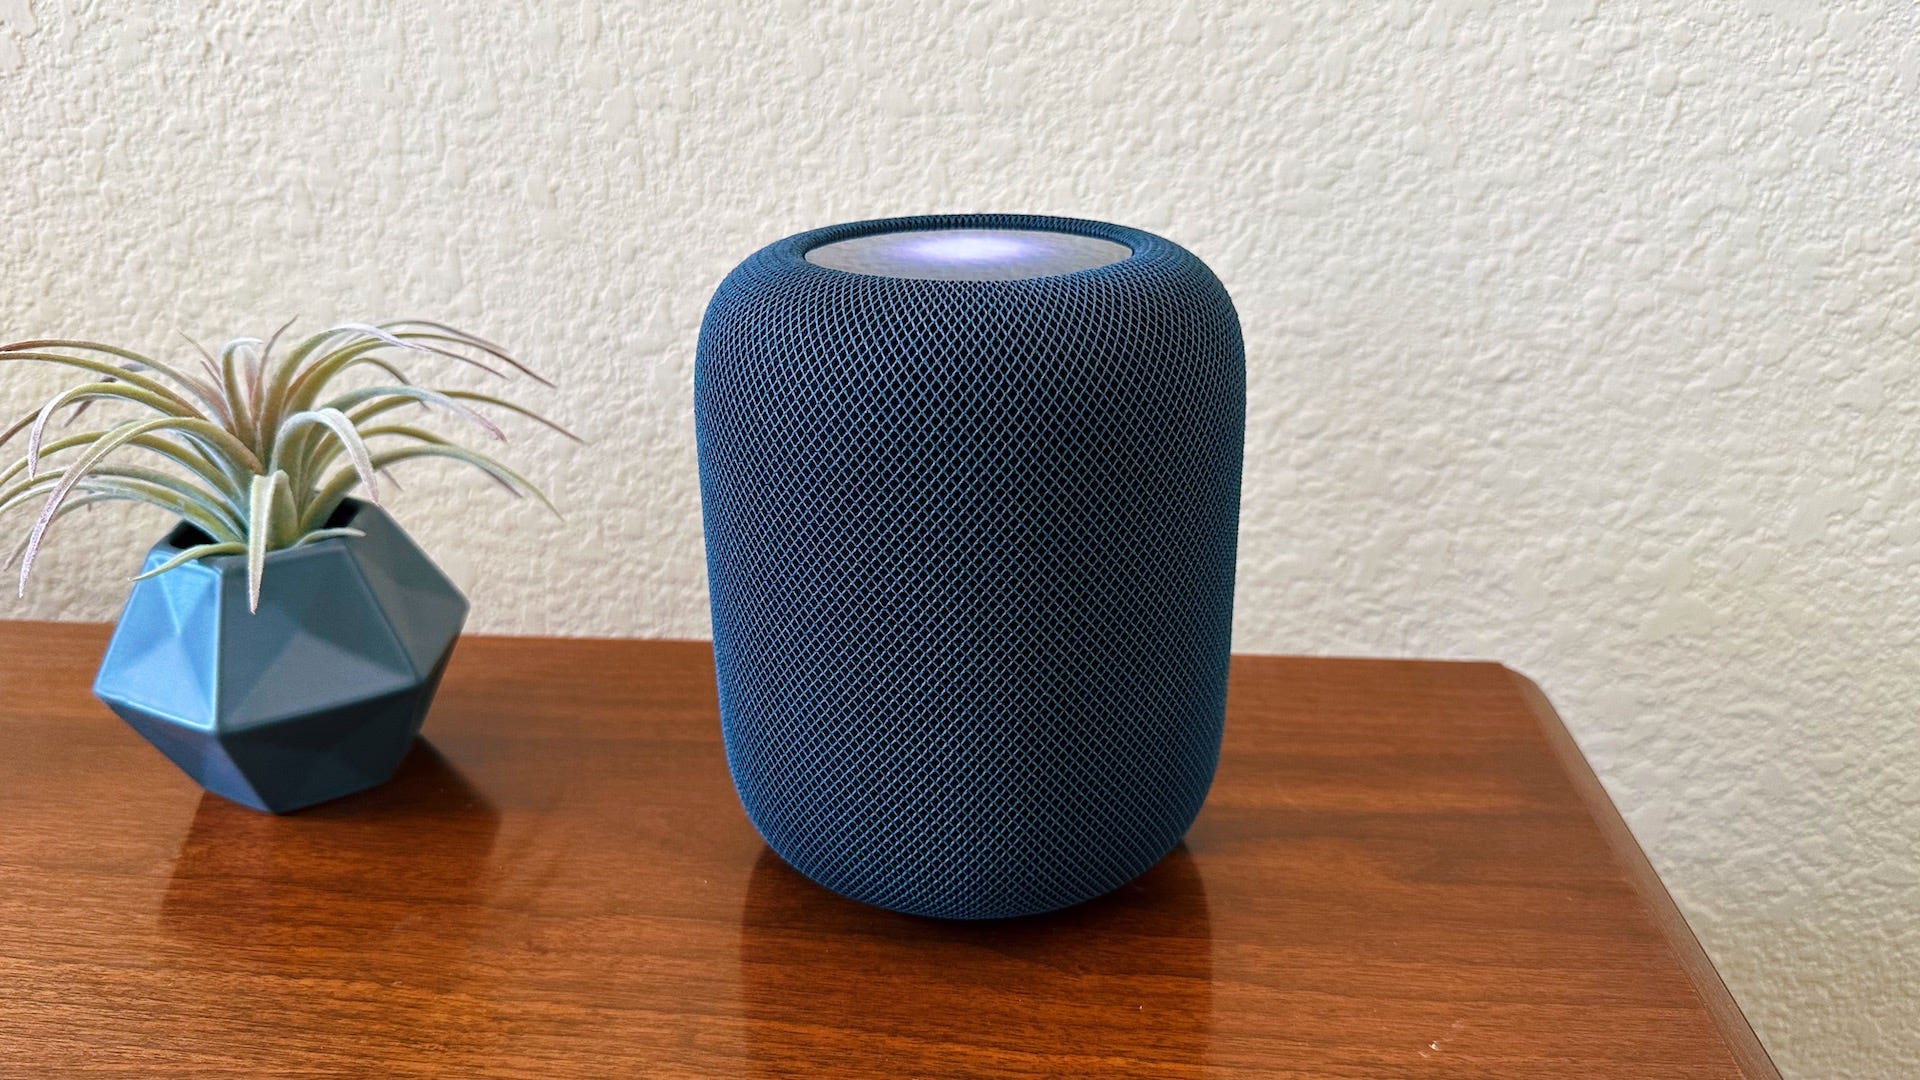 A HomePod showing Siri activated on the top screen.